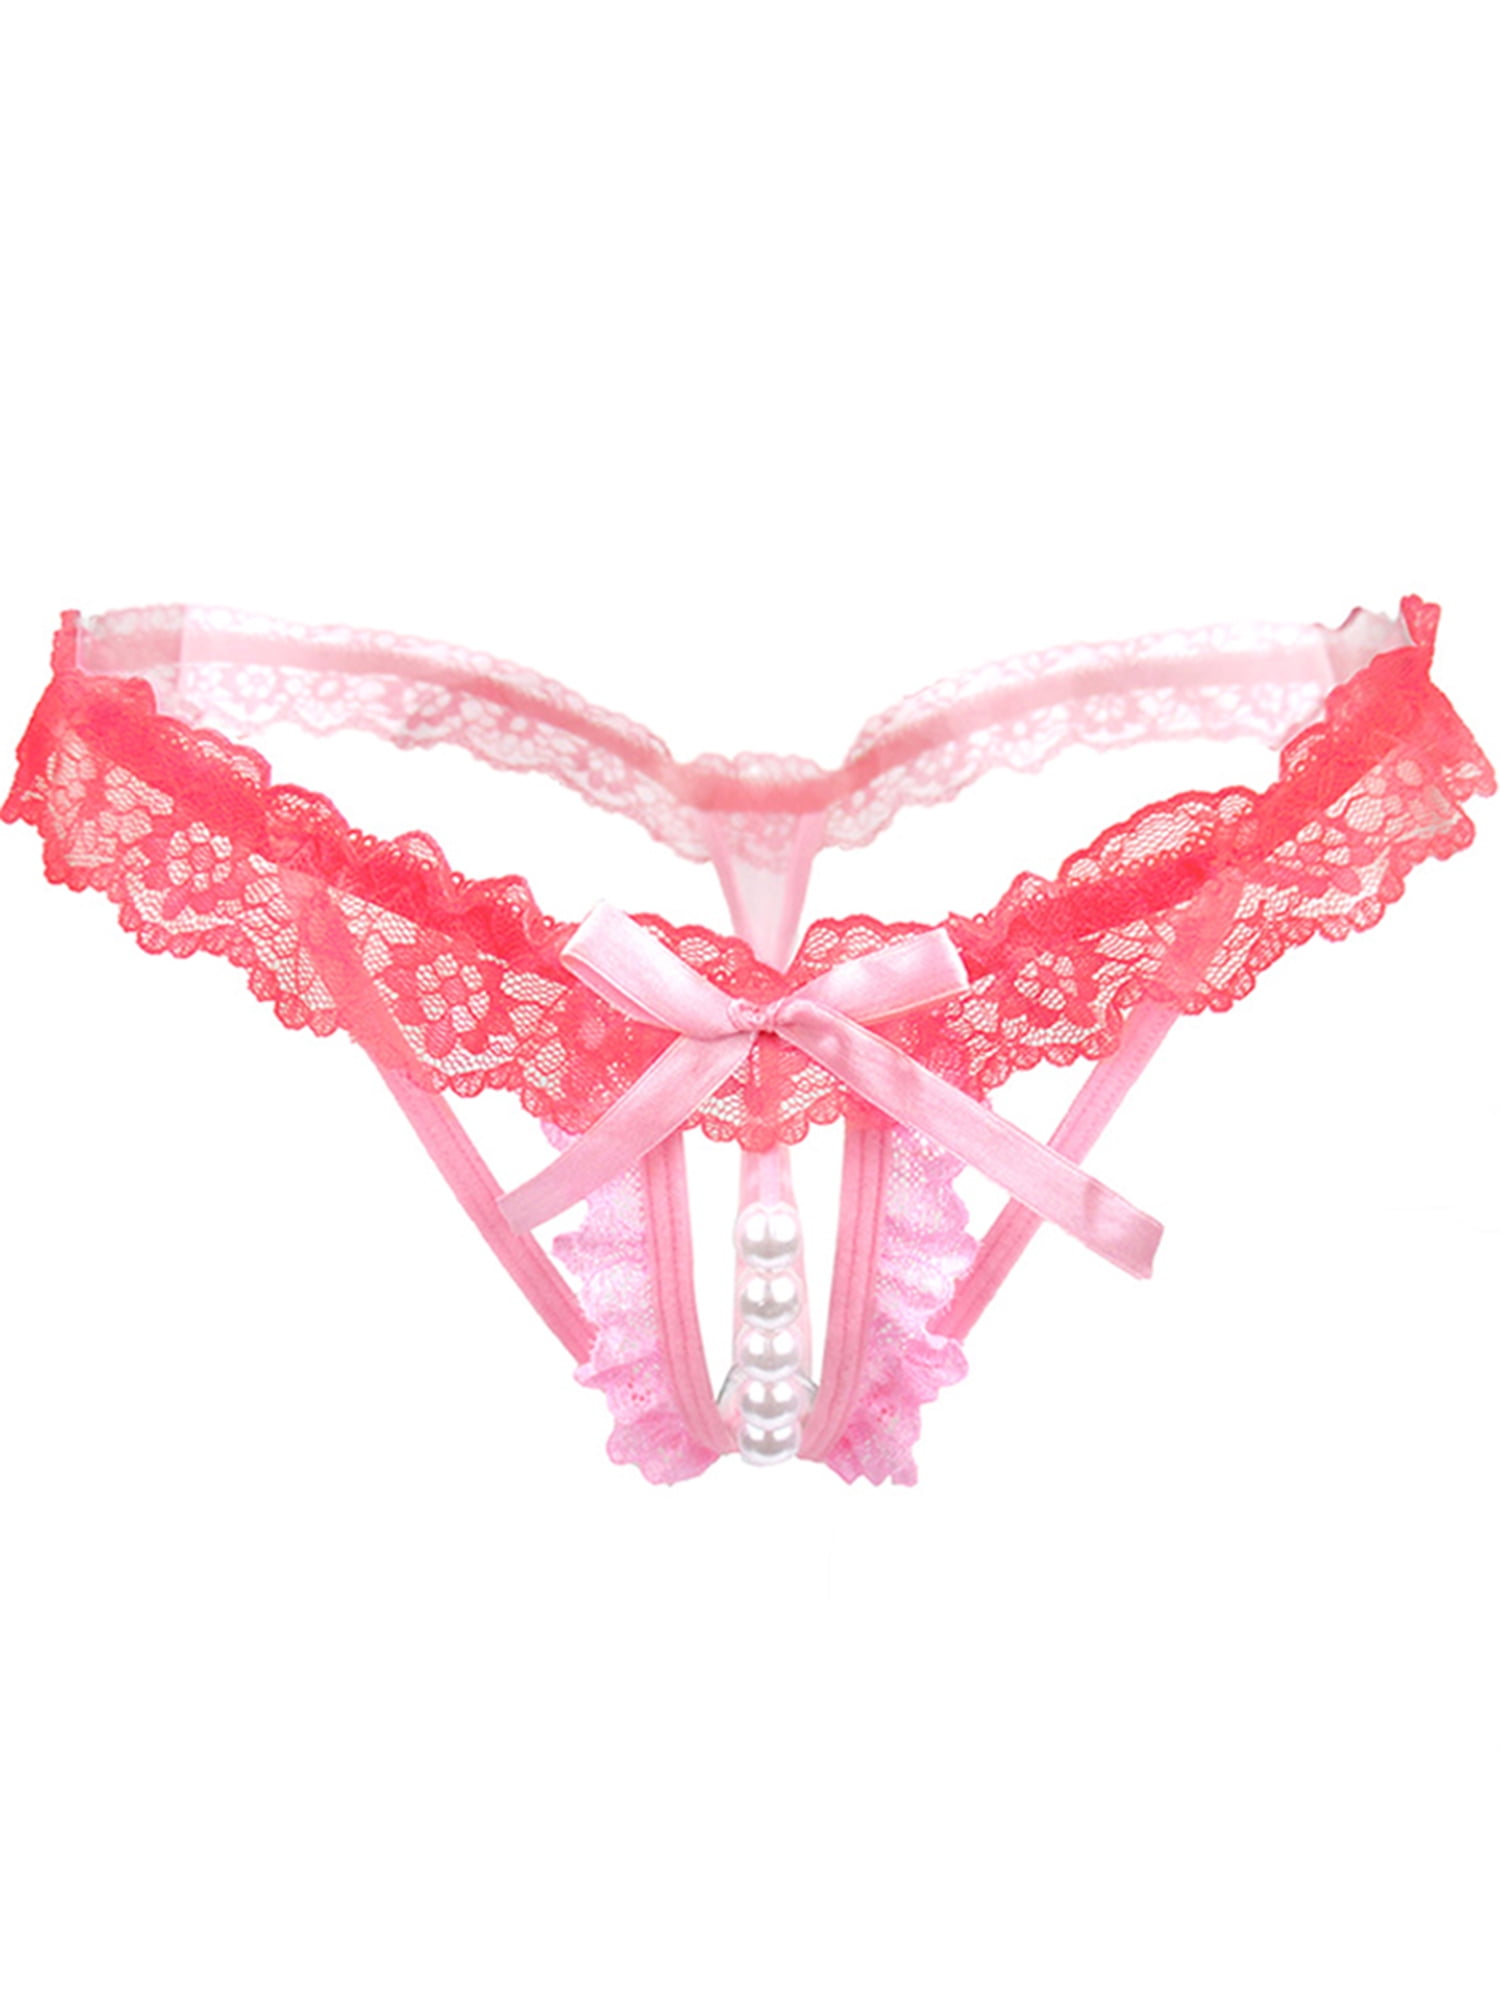 US Women Mesh Lace Crotchless Briefs See-Through Hollow Out Panties Underwear